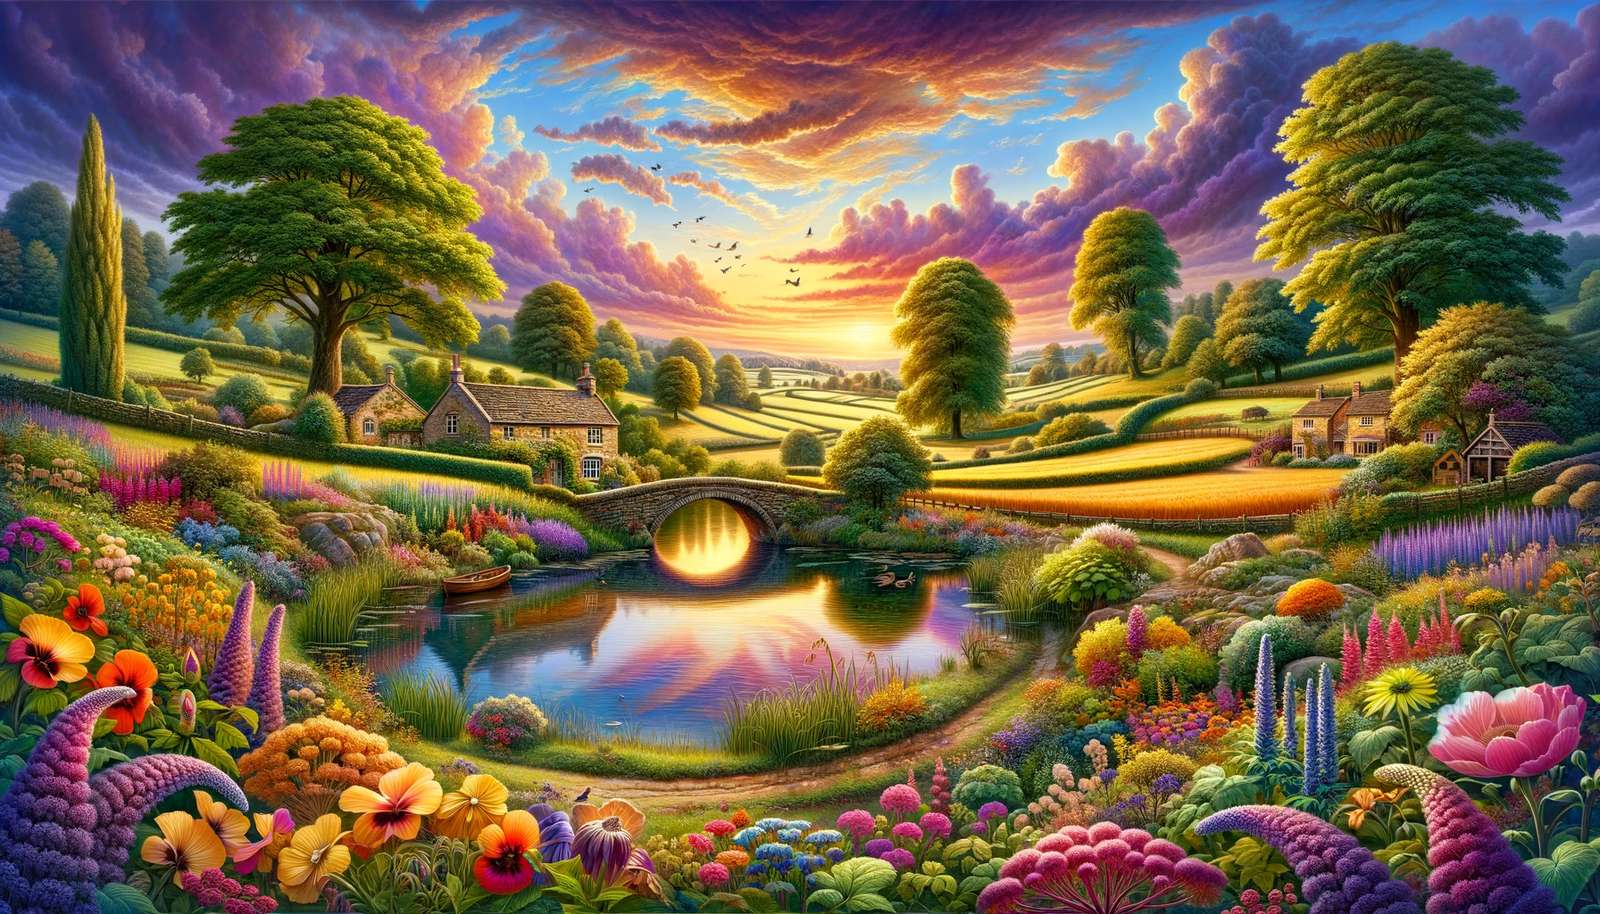 Picturesque countryside landscape jigsaw puzzle online